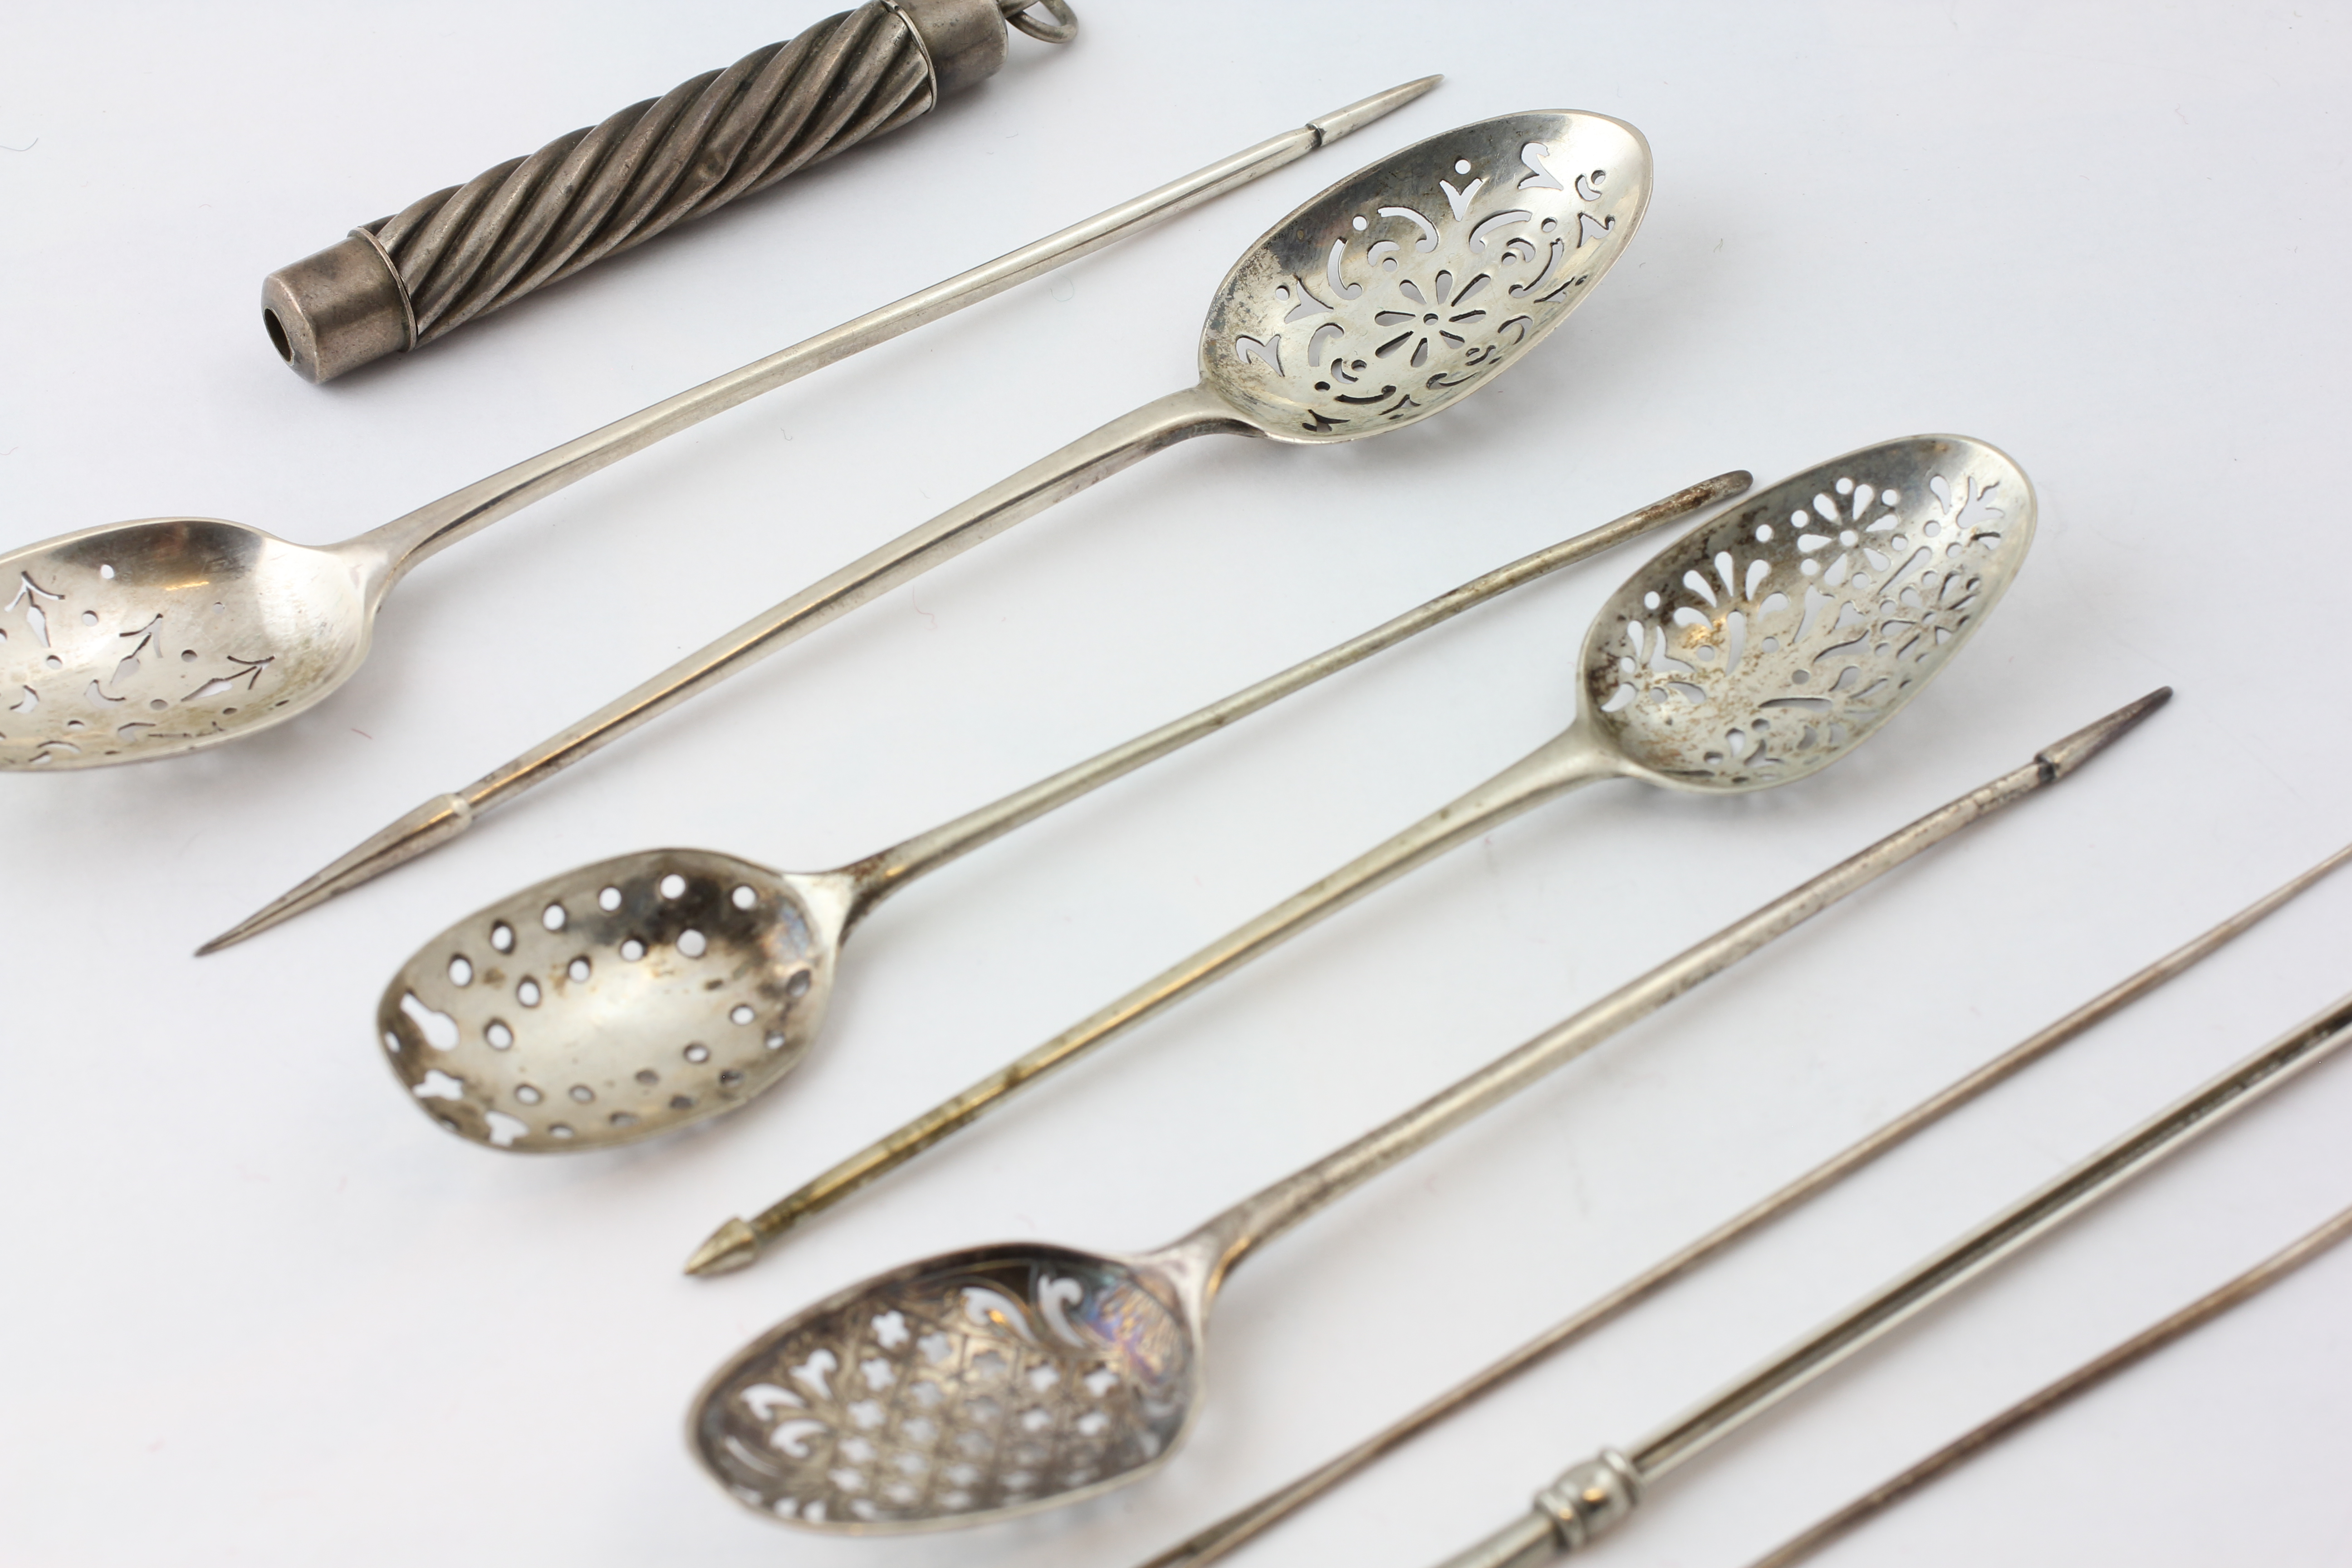 TWO SILVER MULBERRY/OLIVE SPOONS, LONDON 1799, THREE MULBERRY/OLIVE SPOONS, ONE EAR SCOOP, - Image 3 of 4